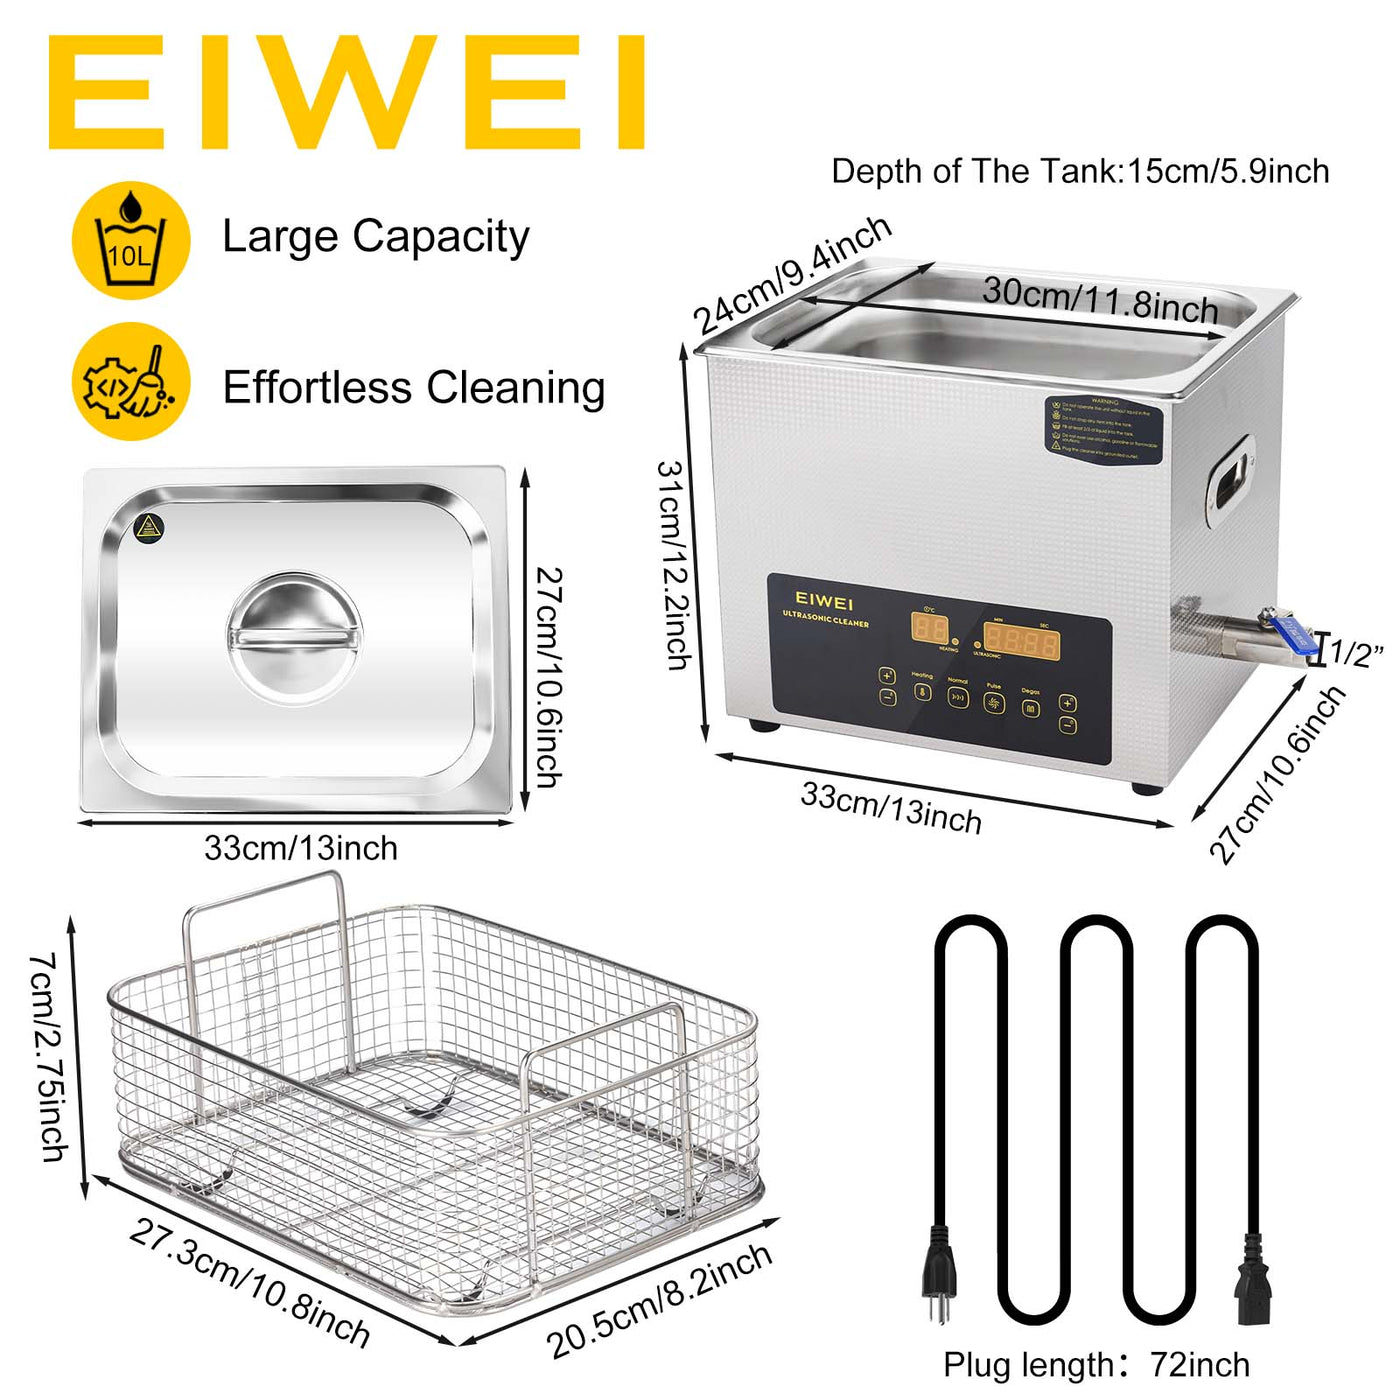 EIWEI 10L Ultrasonic Cleaner of Dual Frequency with Degas Function (CD-E10)